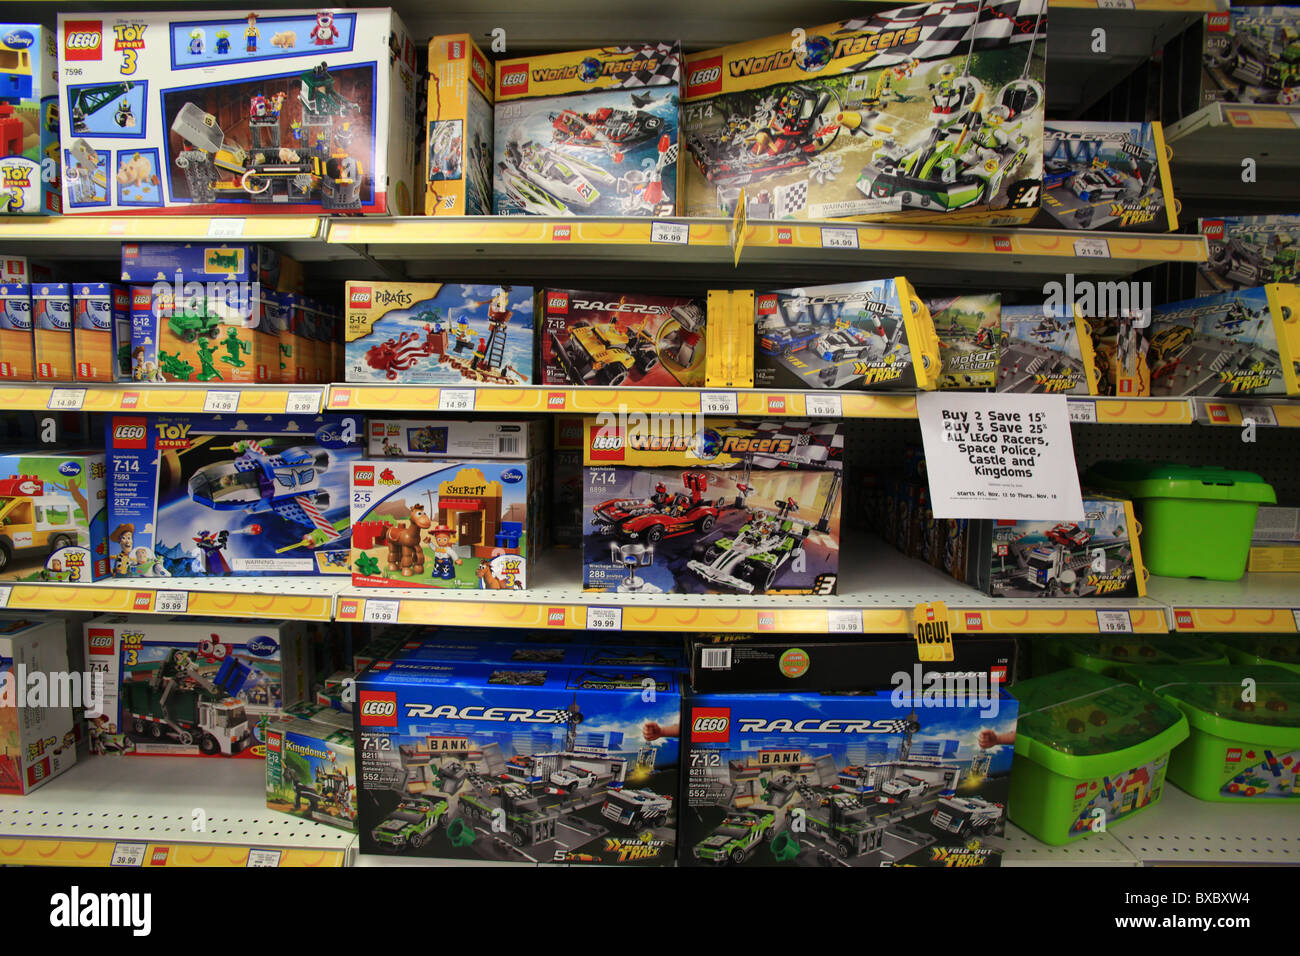 racers for sale in Toys r us store in Canada Stock Photo